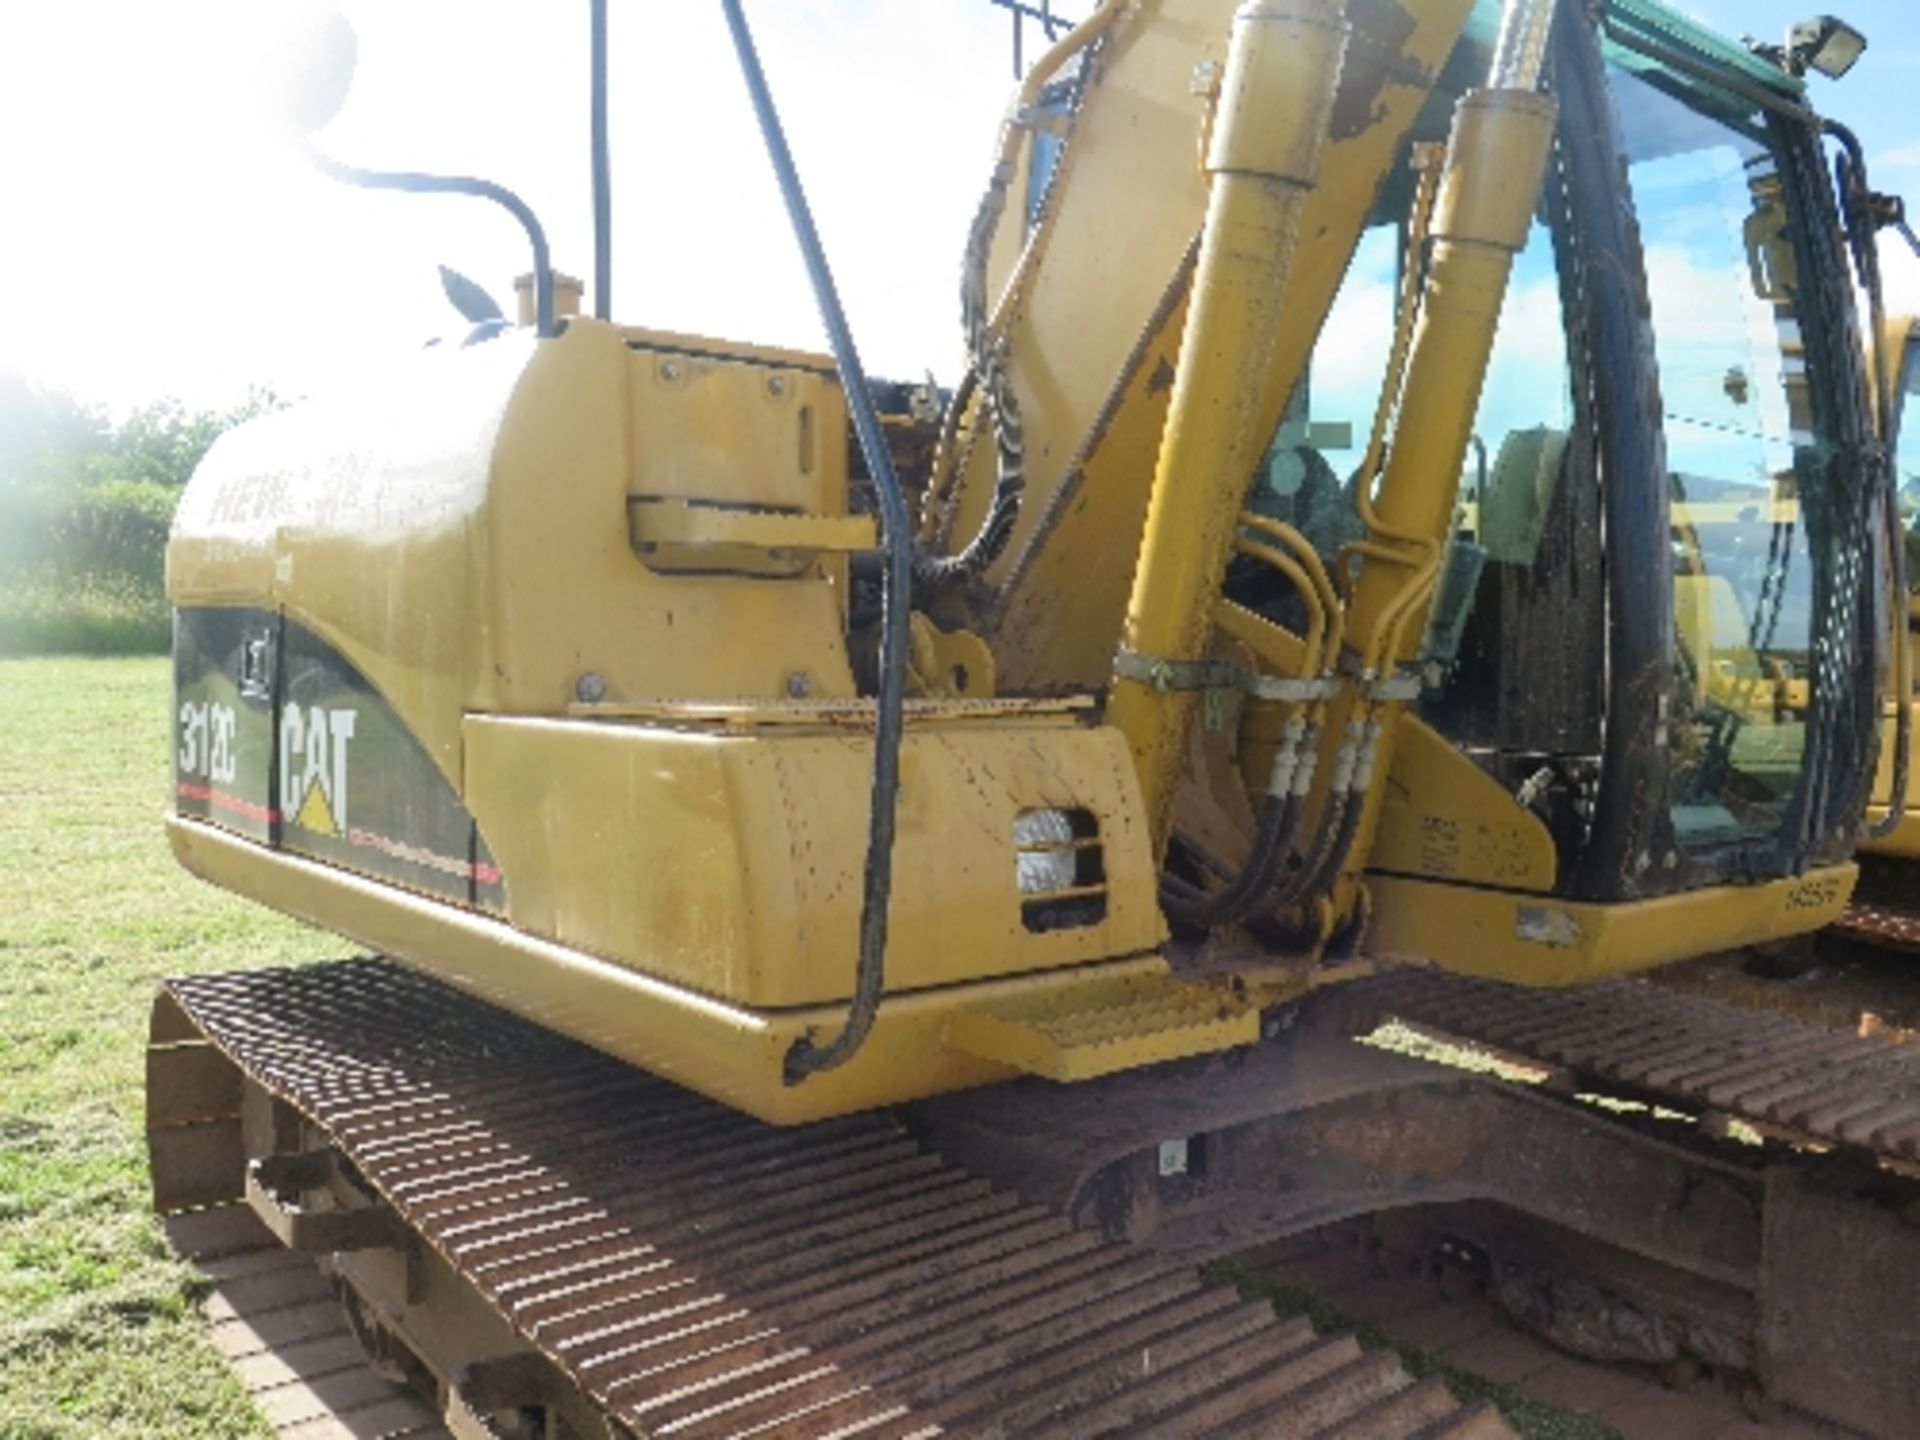 Caterpillar 312C excavator 4972 hrs 2007 145520
POOR LEFT HAND TRACKING IN REVERSE
ALL LOTS are - Image 5 of 8